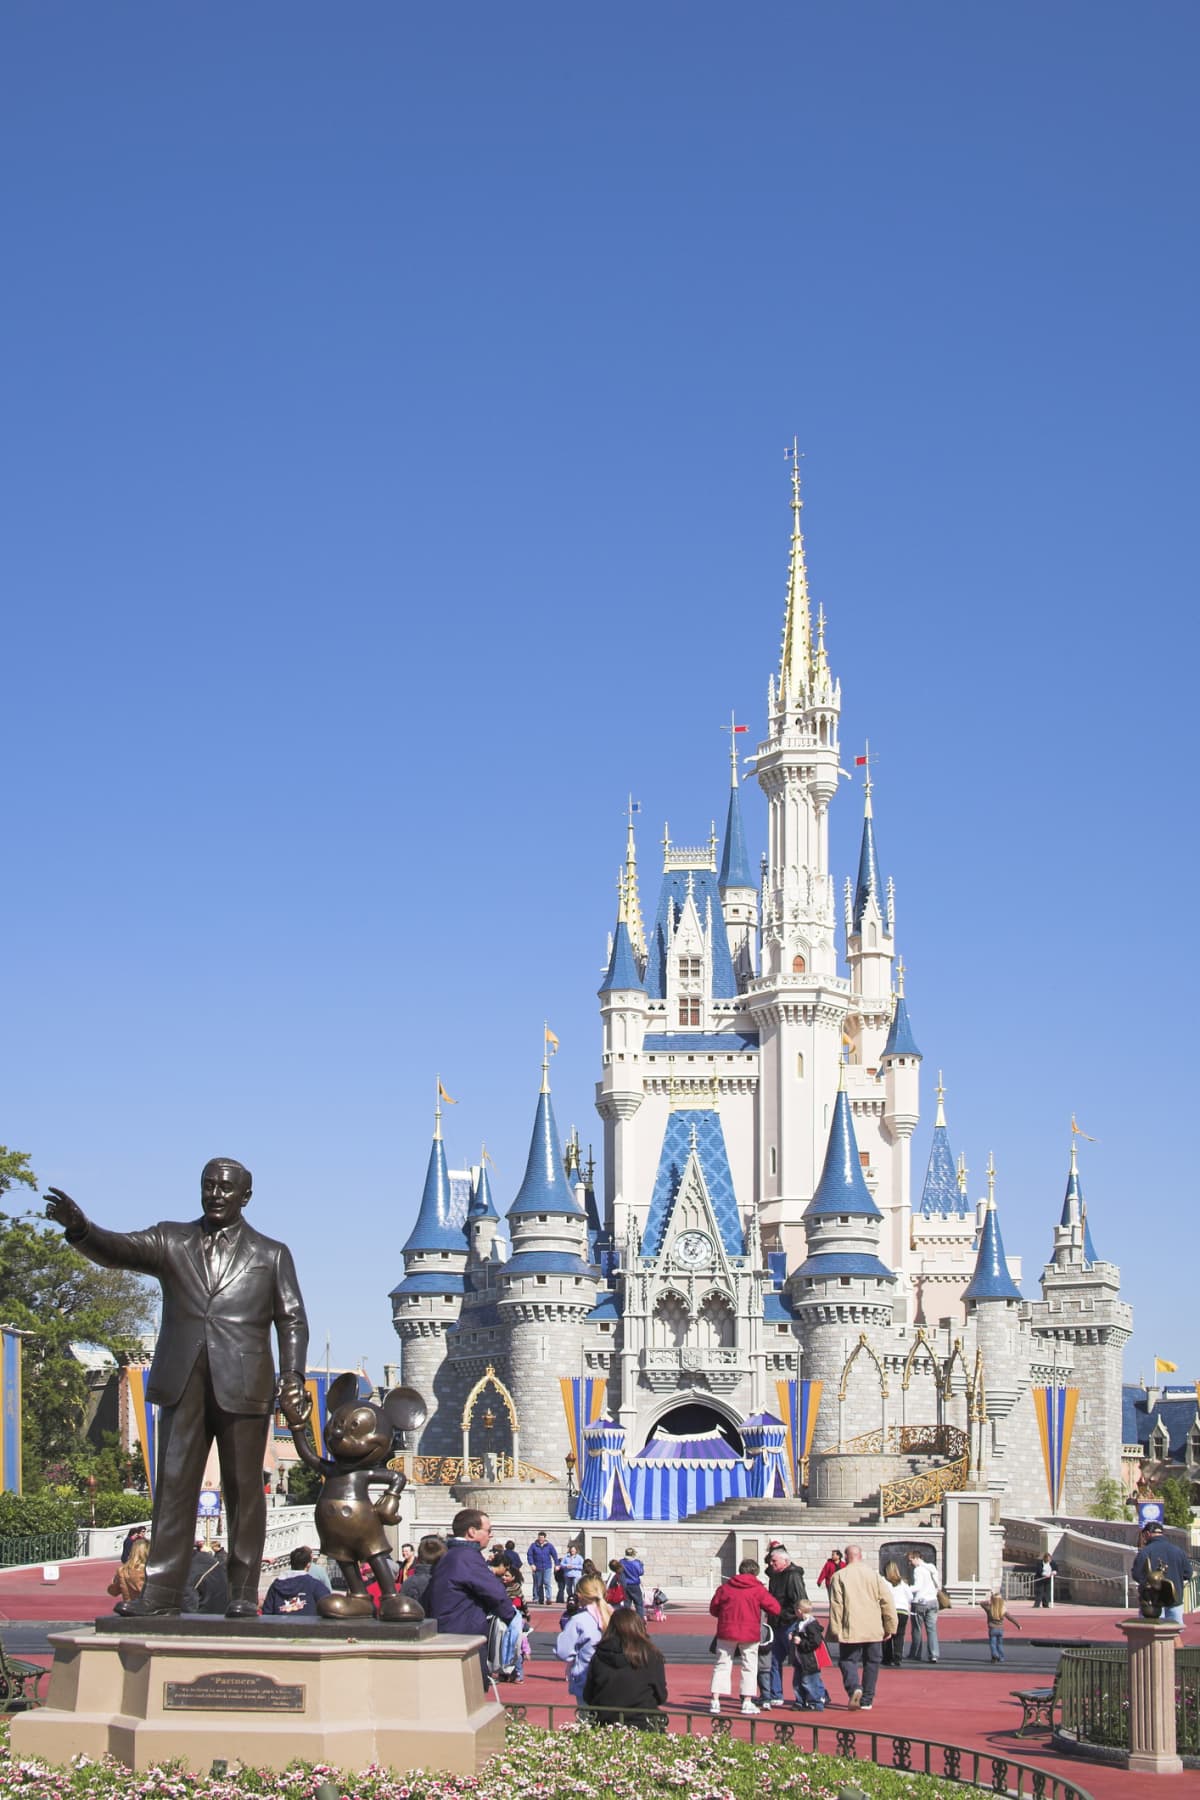 Tourists walk between the Walt Disney and Mickey Mouse statue and Cinderella's Castle at Disney World.